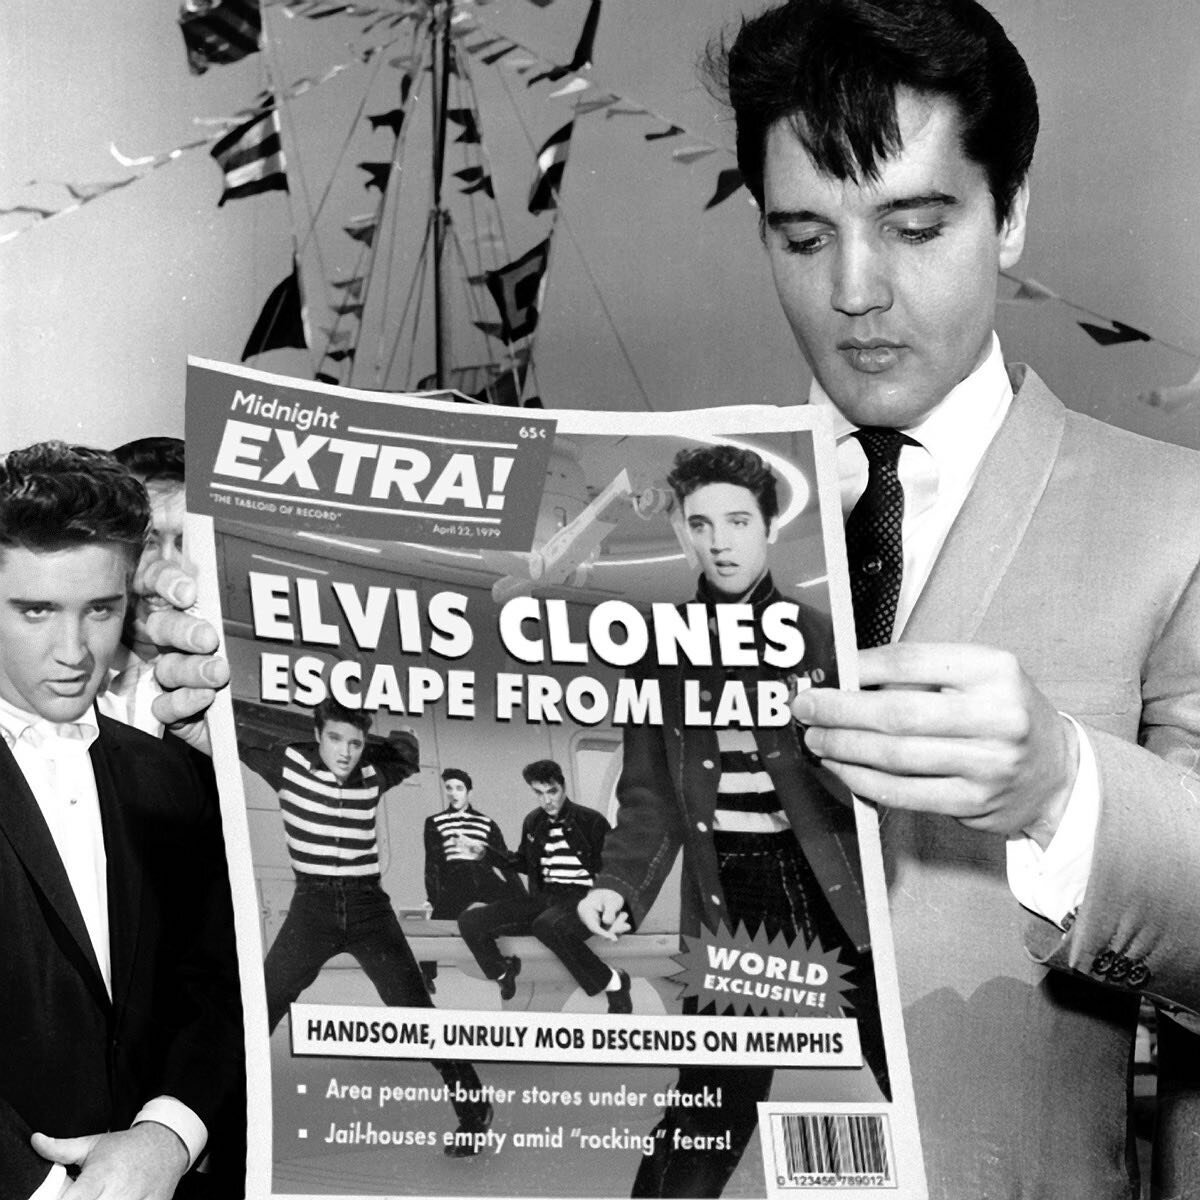 Elvis Presley, the King of Rock and Roll (and fervent reader of the Midnight Extra), reads of the CATASTROPHIC CLONE CAPER in our issue from April 22, 1979! Though his many handlers tried to keep the news a secret, the King could not be stopped from 